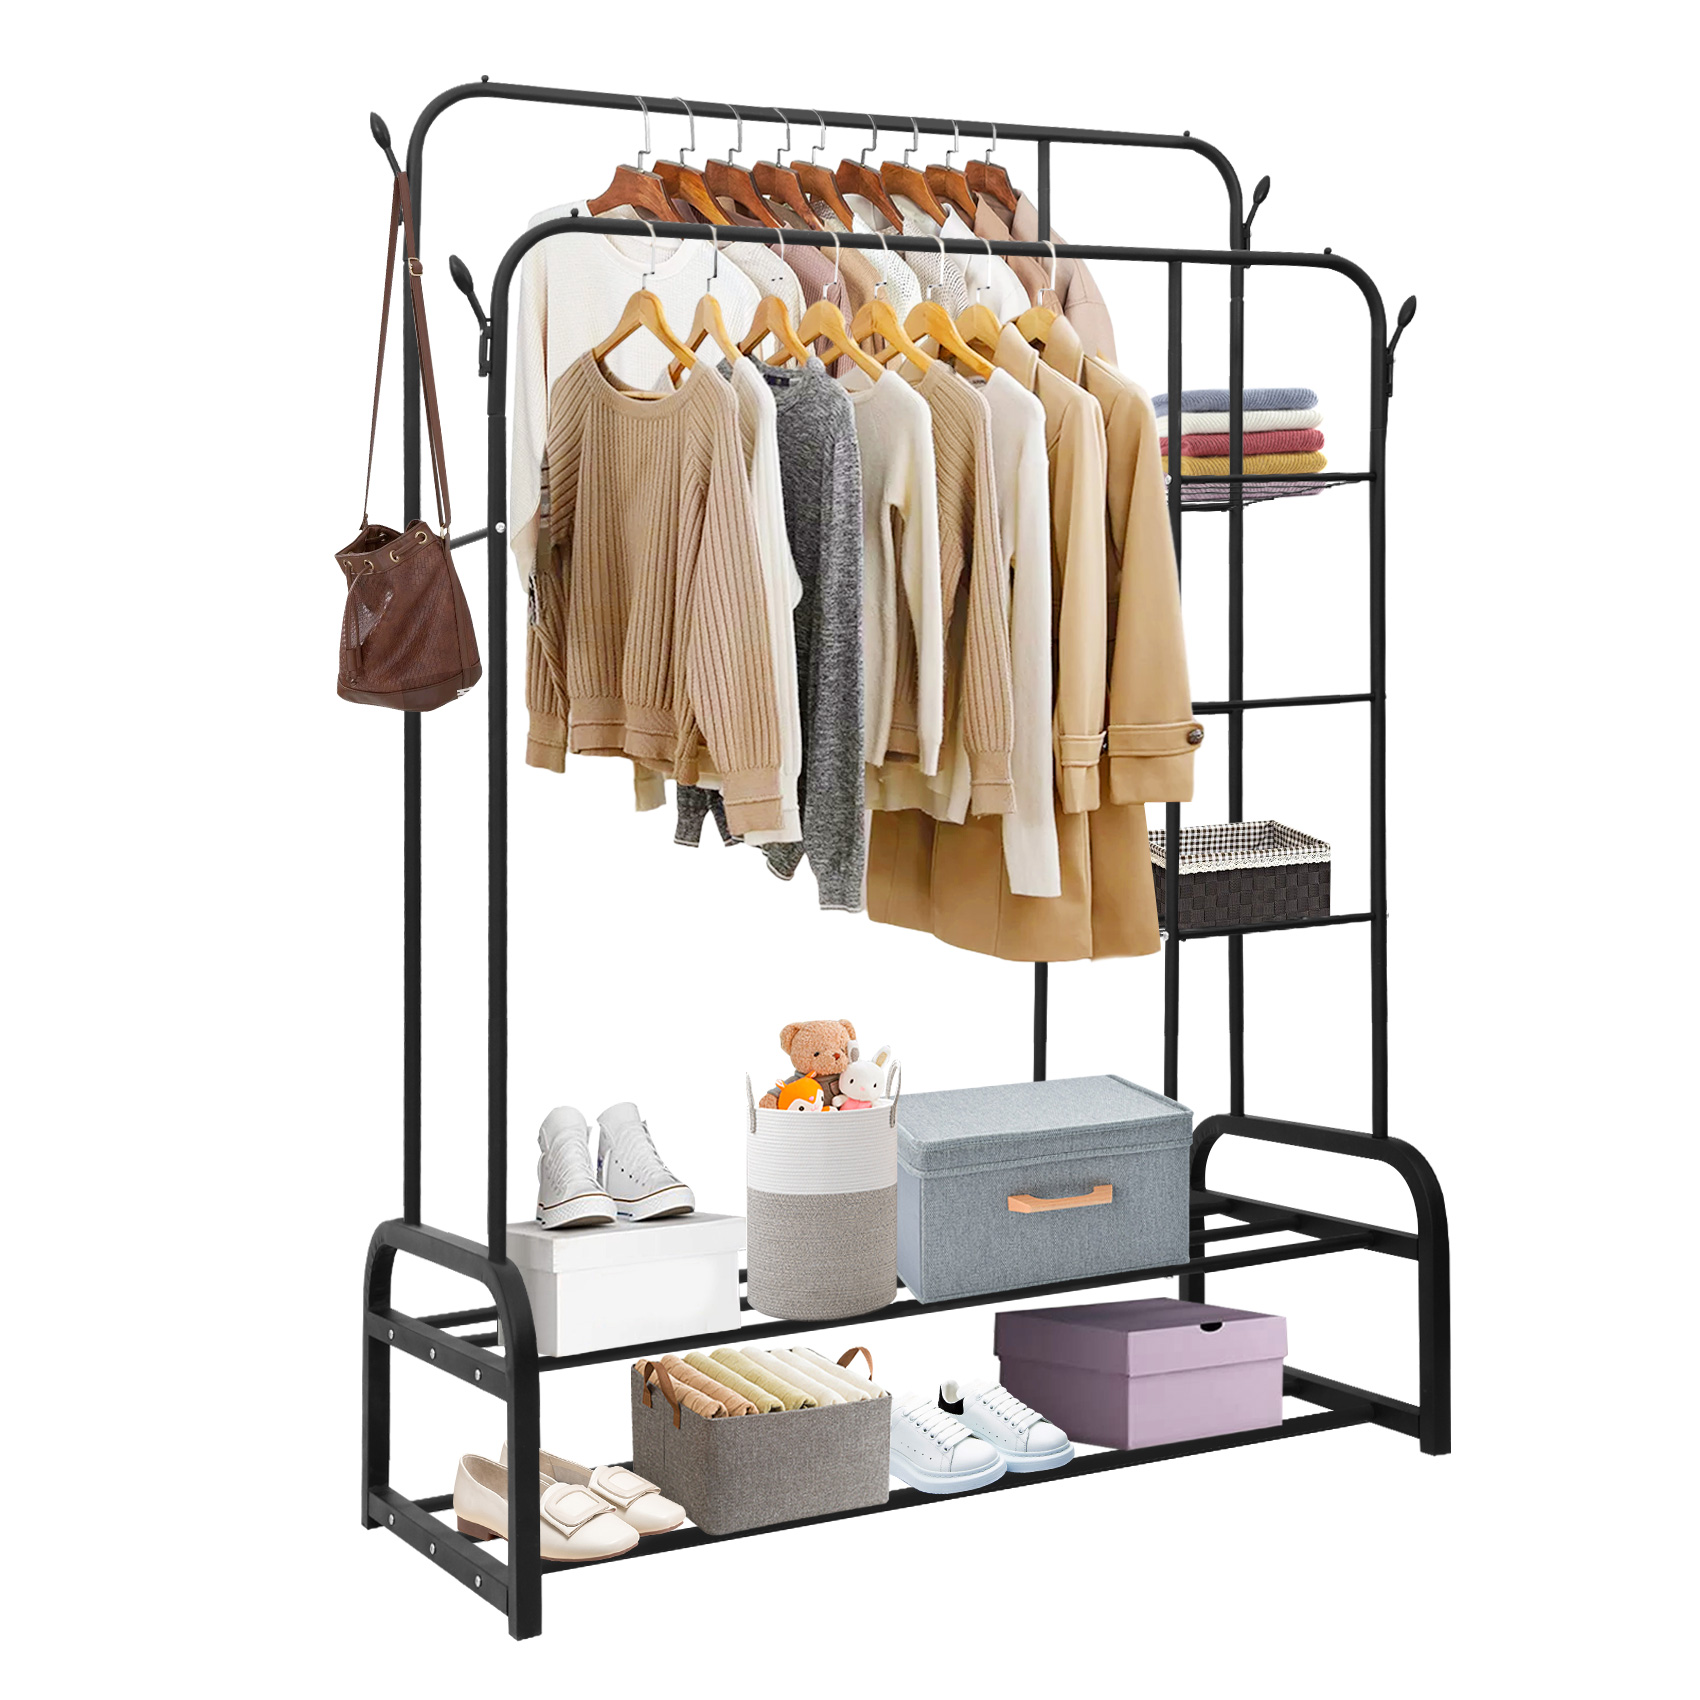 VL17016 Knight Valet with Extended Bar and Key Rack in Black - Walmart.com